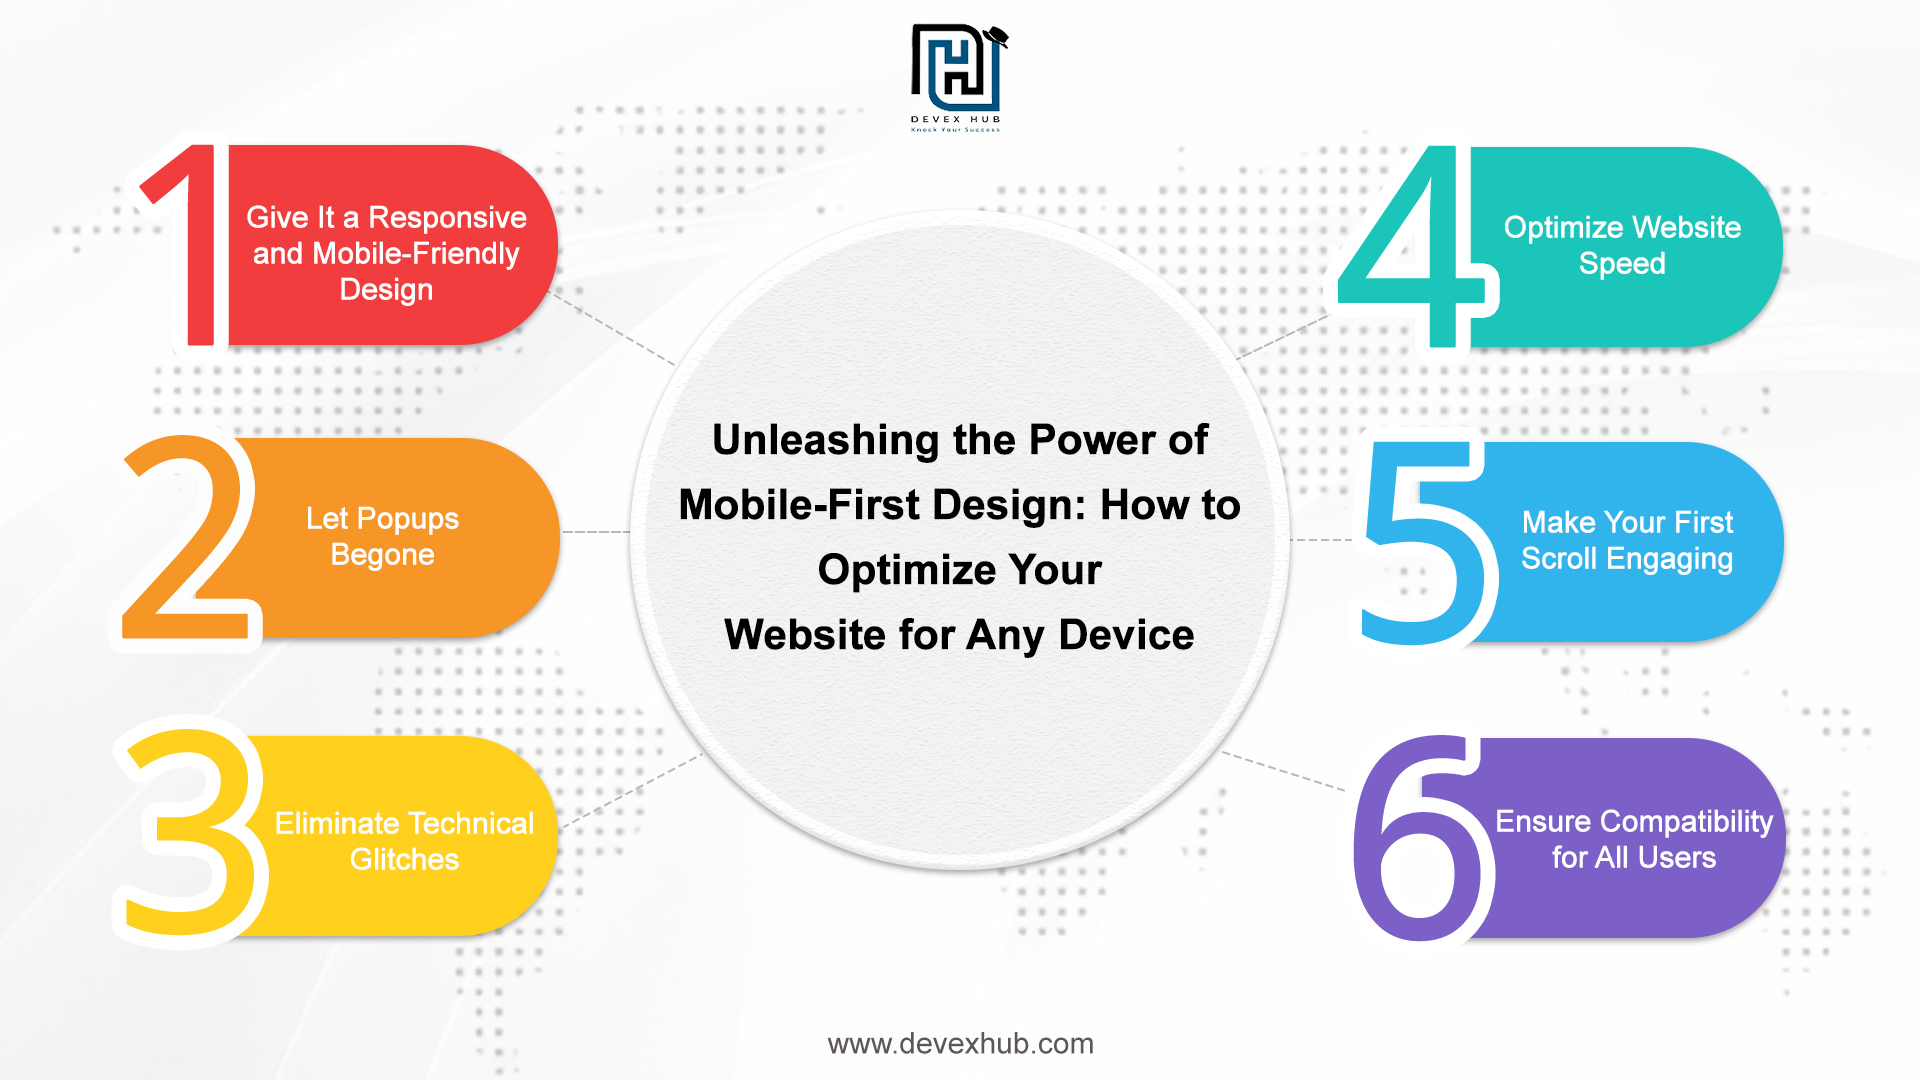 Unleashing the Power of Mobile-First Design: How to Optimize Your Website for Any Device